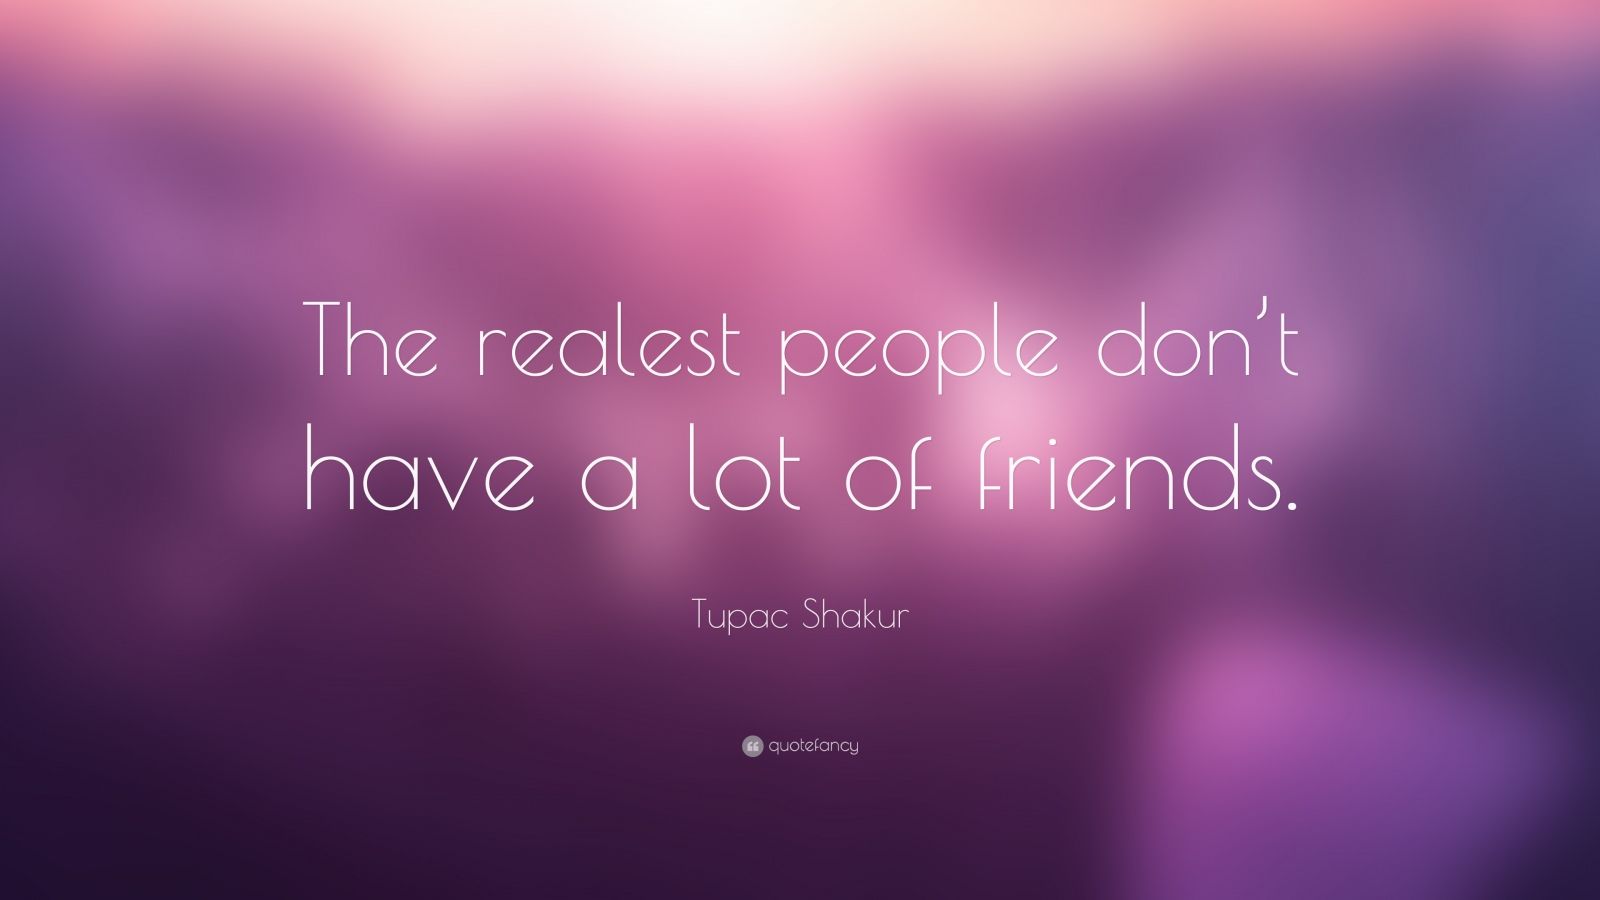 Tupac Shakur Quote: “The realest people don’t have a lot of friends ...